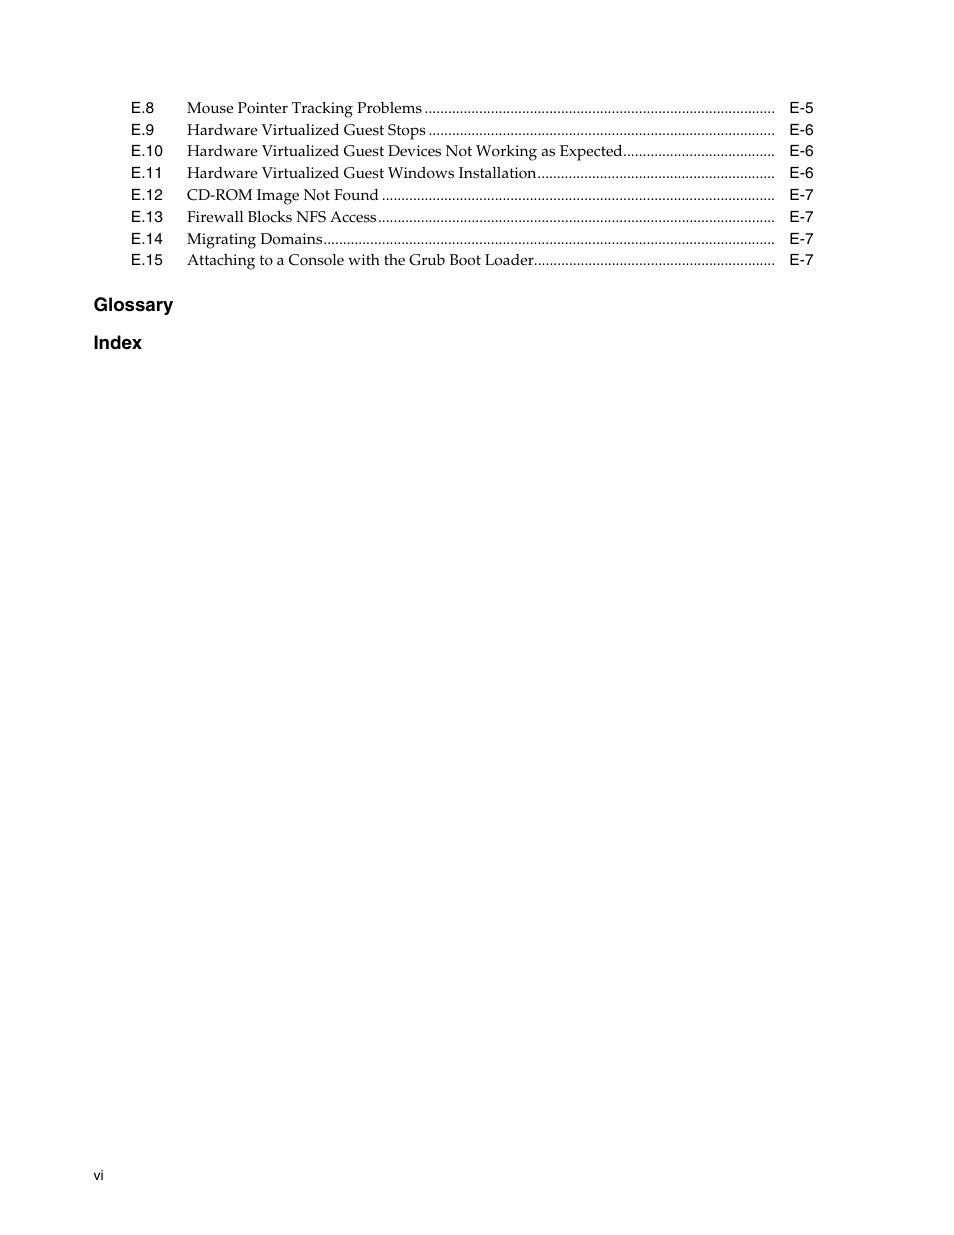 Oracle Audio Technologies E10898-02 User Manual | Page 6 / 112